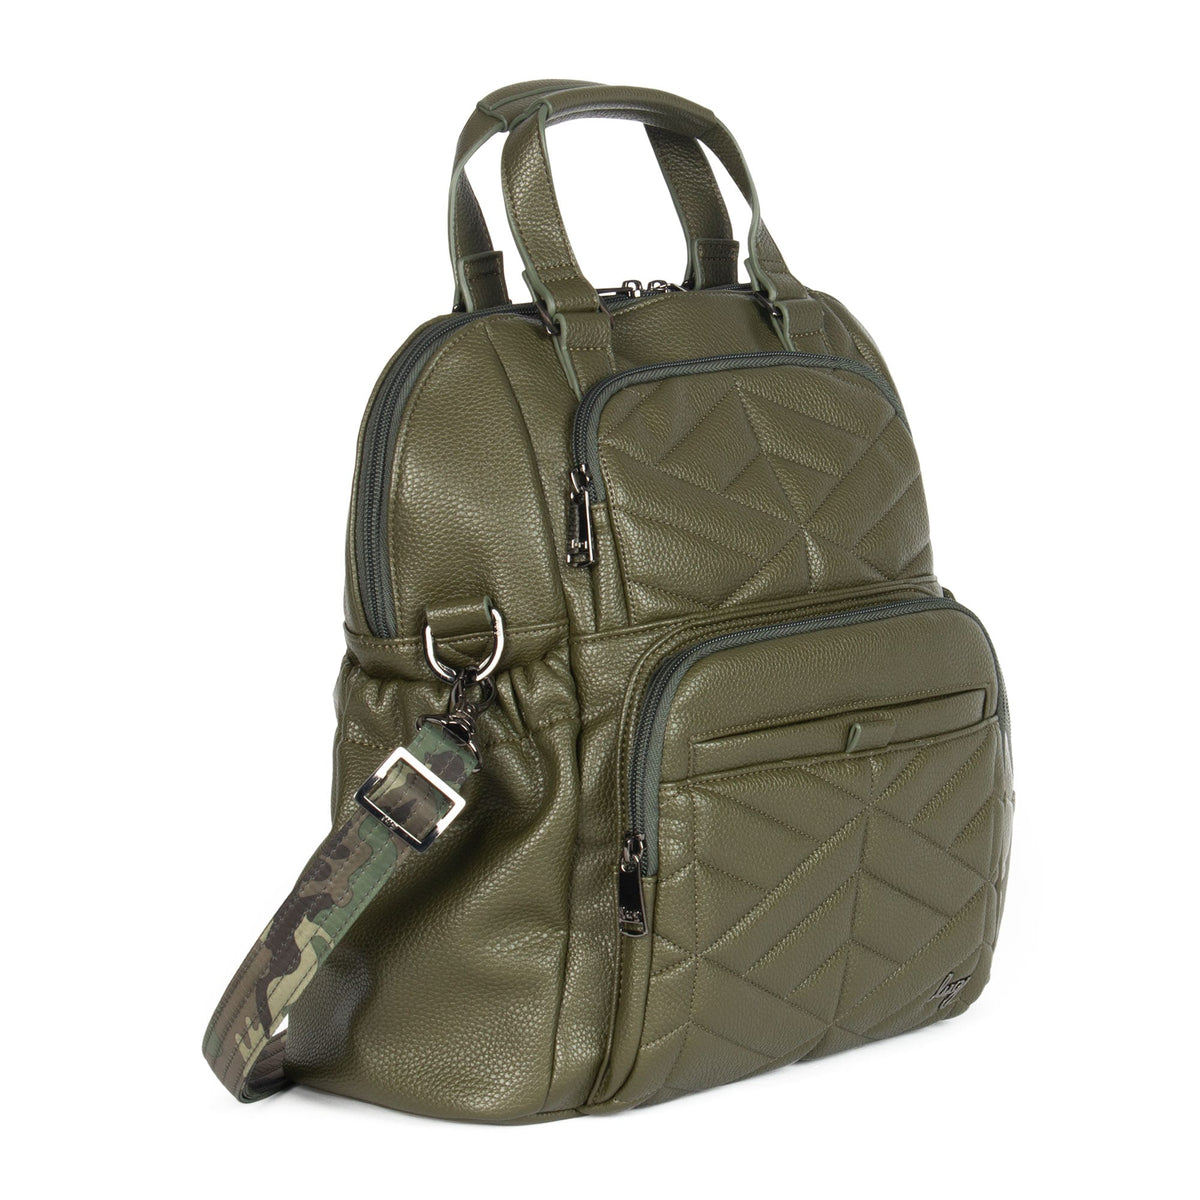 Canter Classic VL Convertible Tote Bag